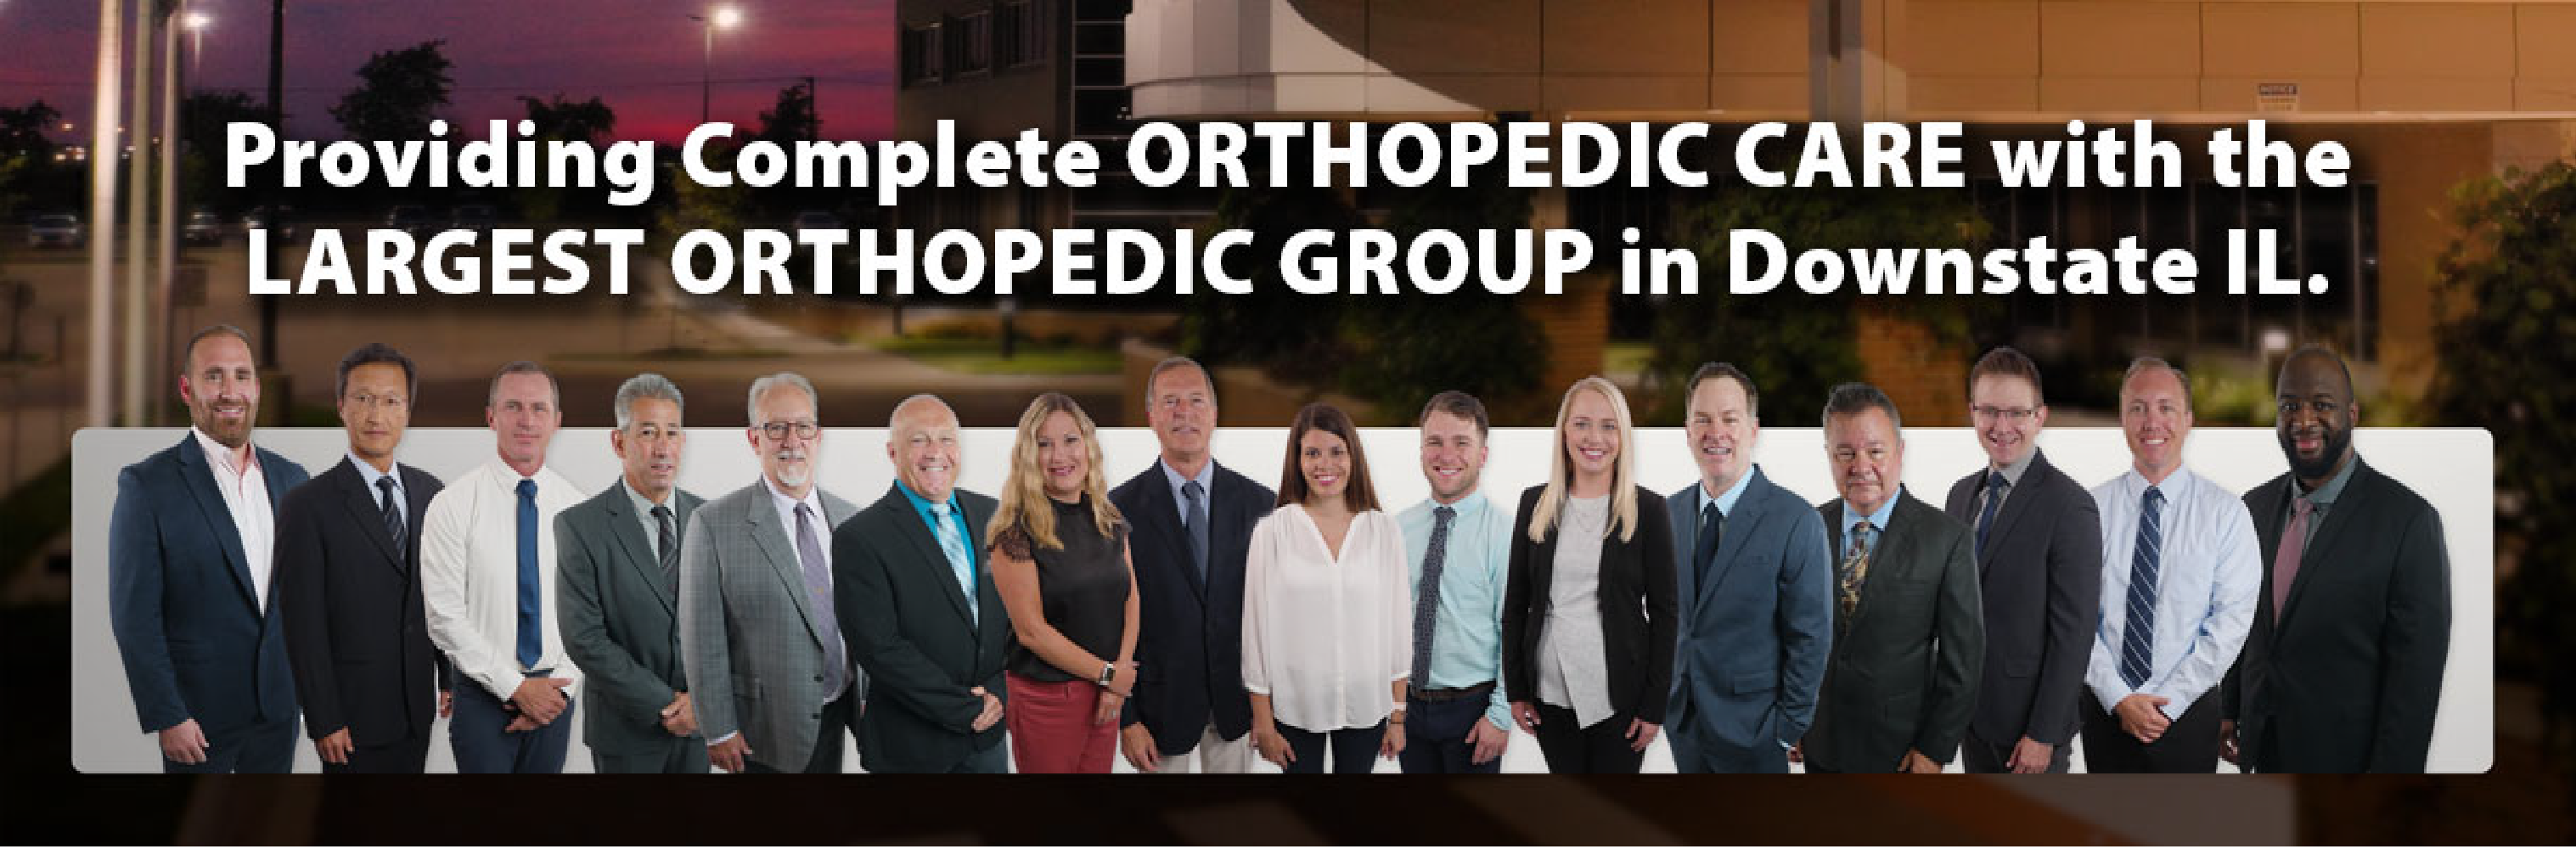 OrthoGroup.png